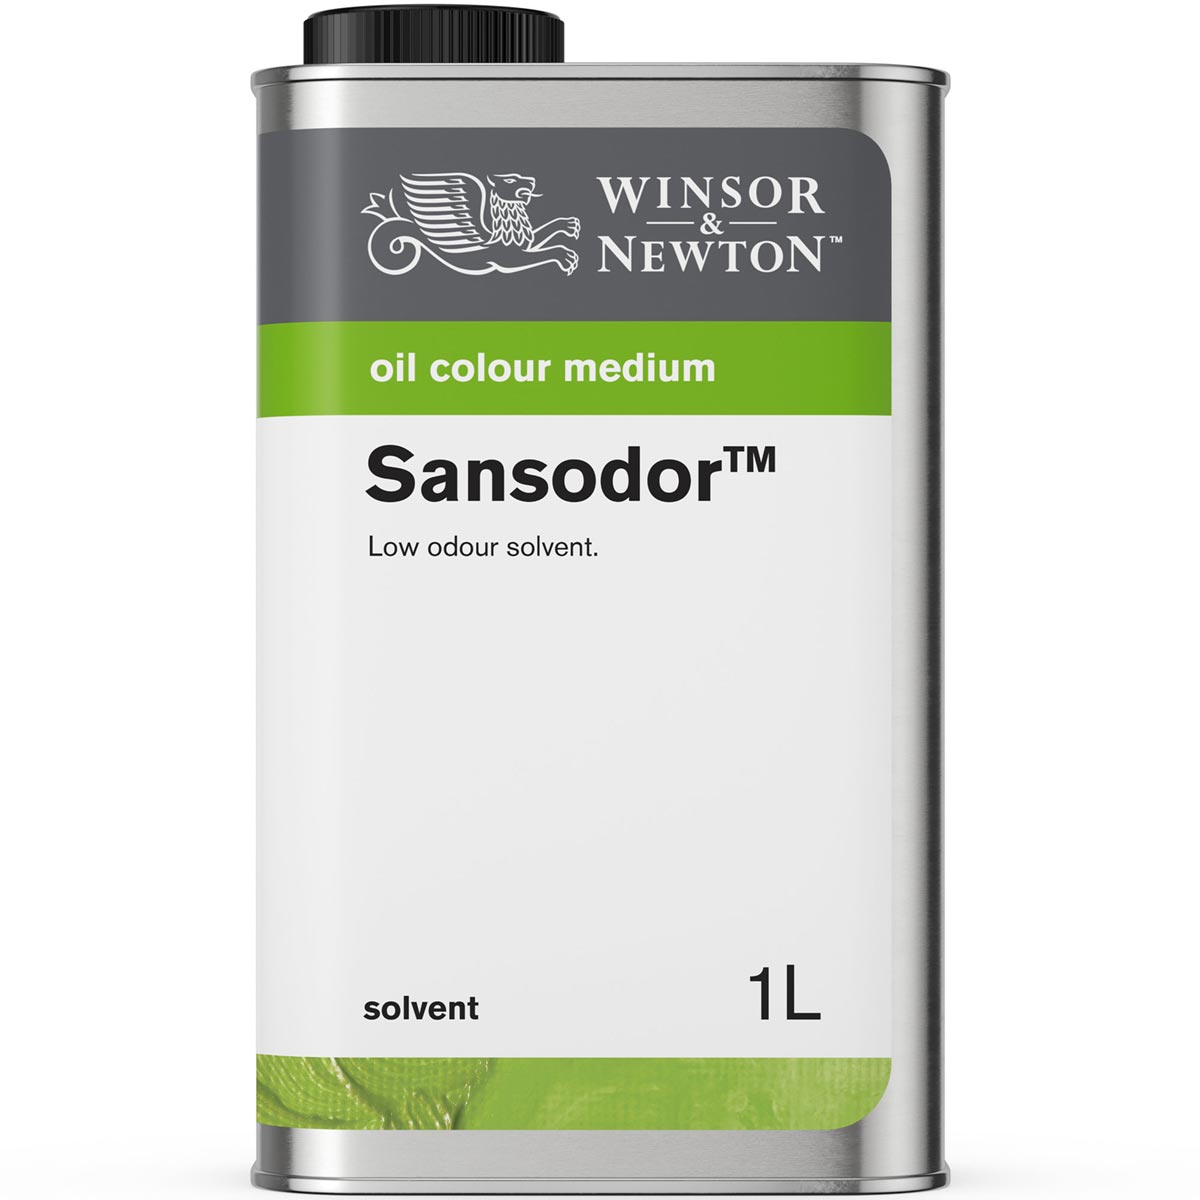 Winsor and Newton - Sansodor Low Odour Solvent Cleaner - 1 Litre